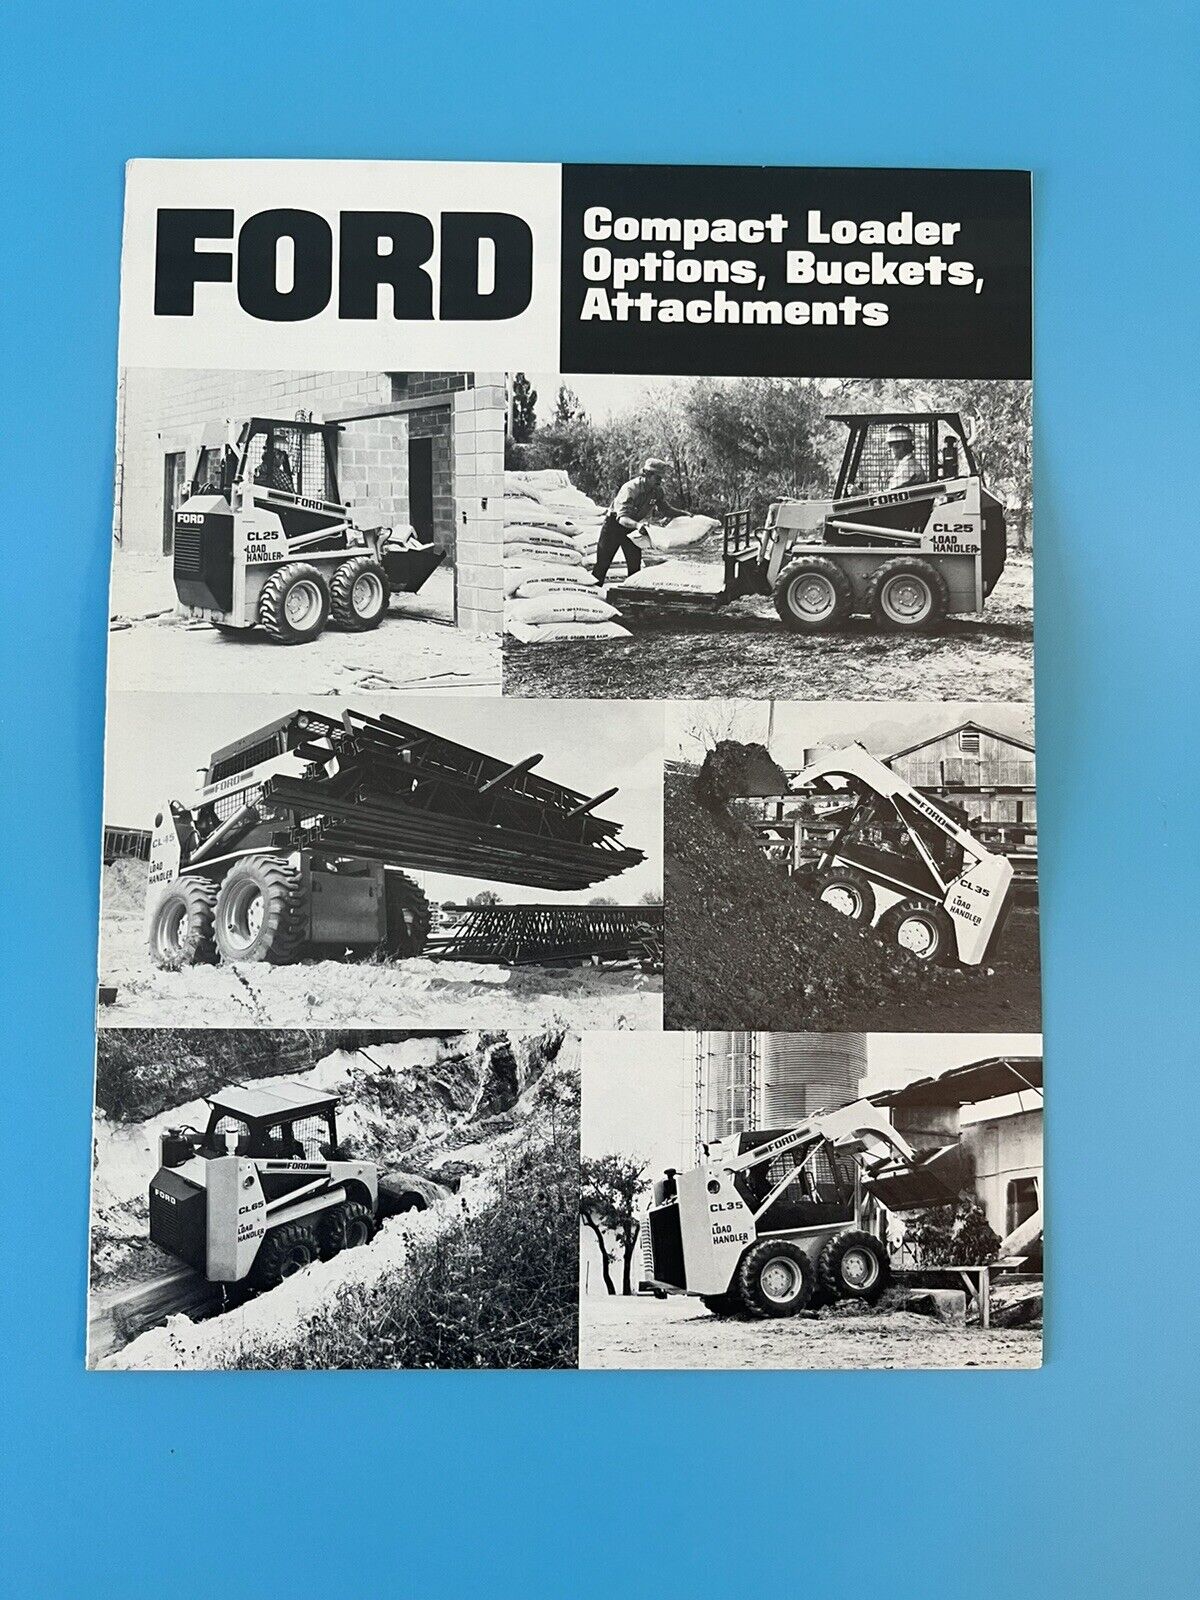 Vintage FORD Compact Loader Options, Buckets, Attachments Buyers Guide. 